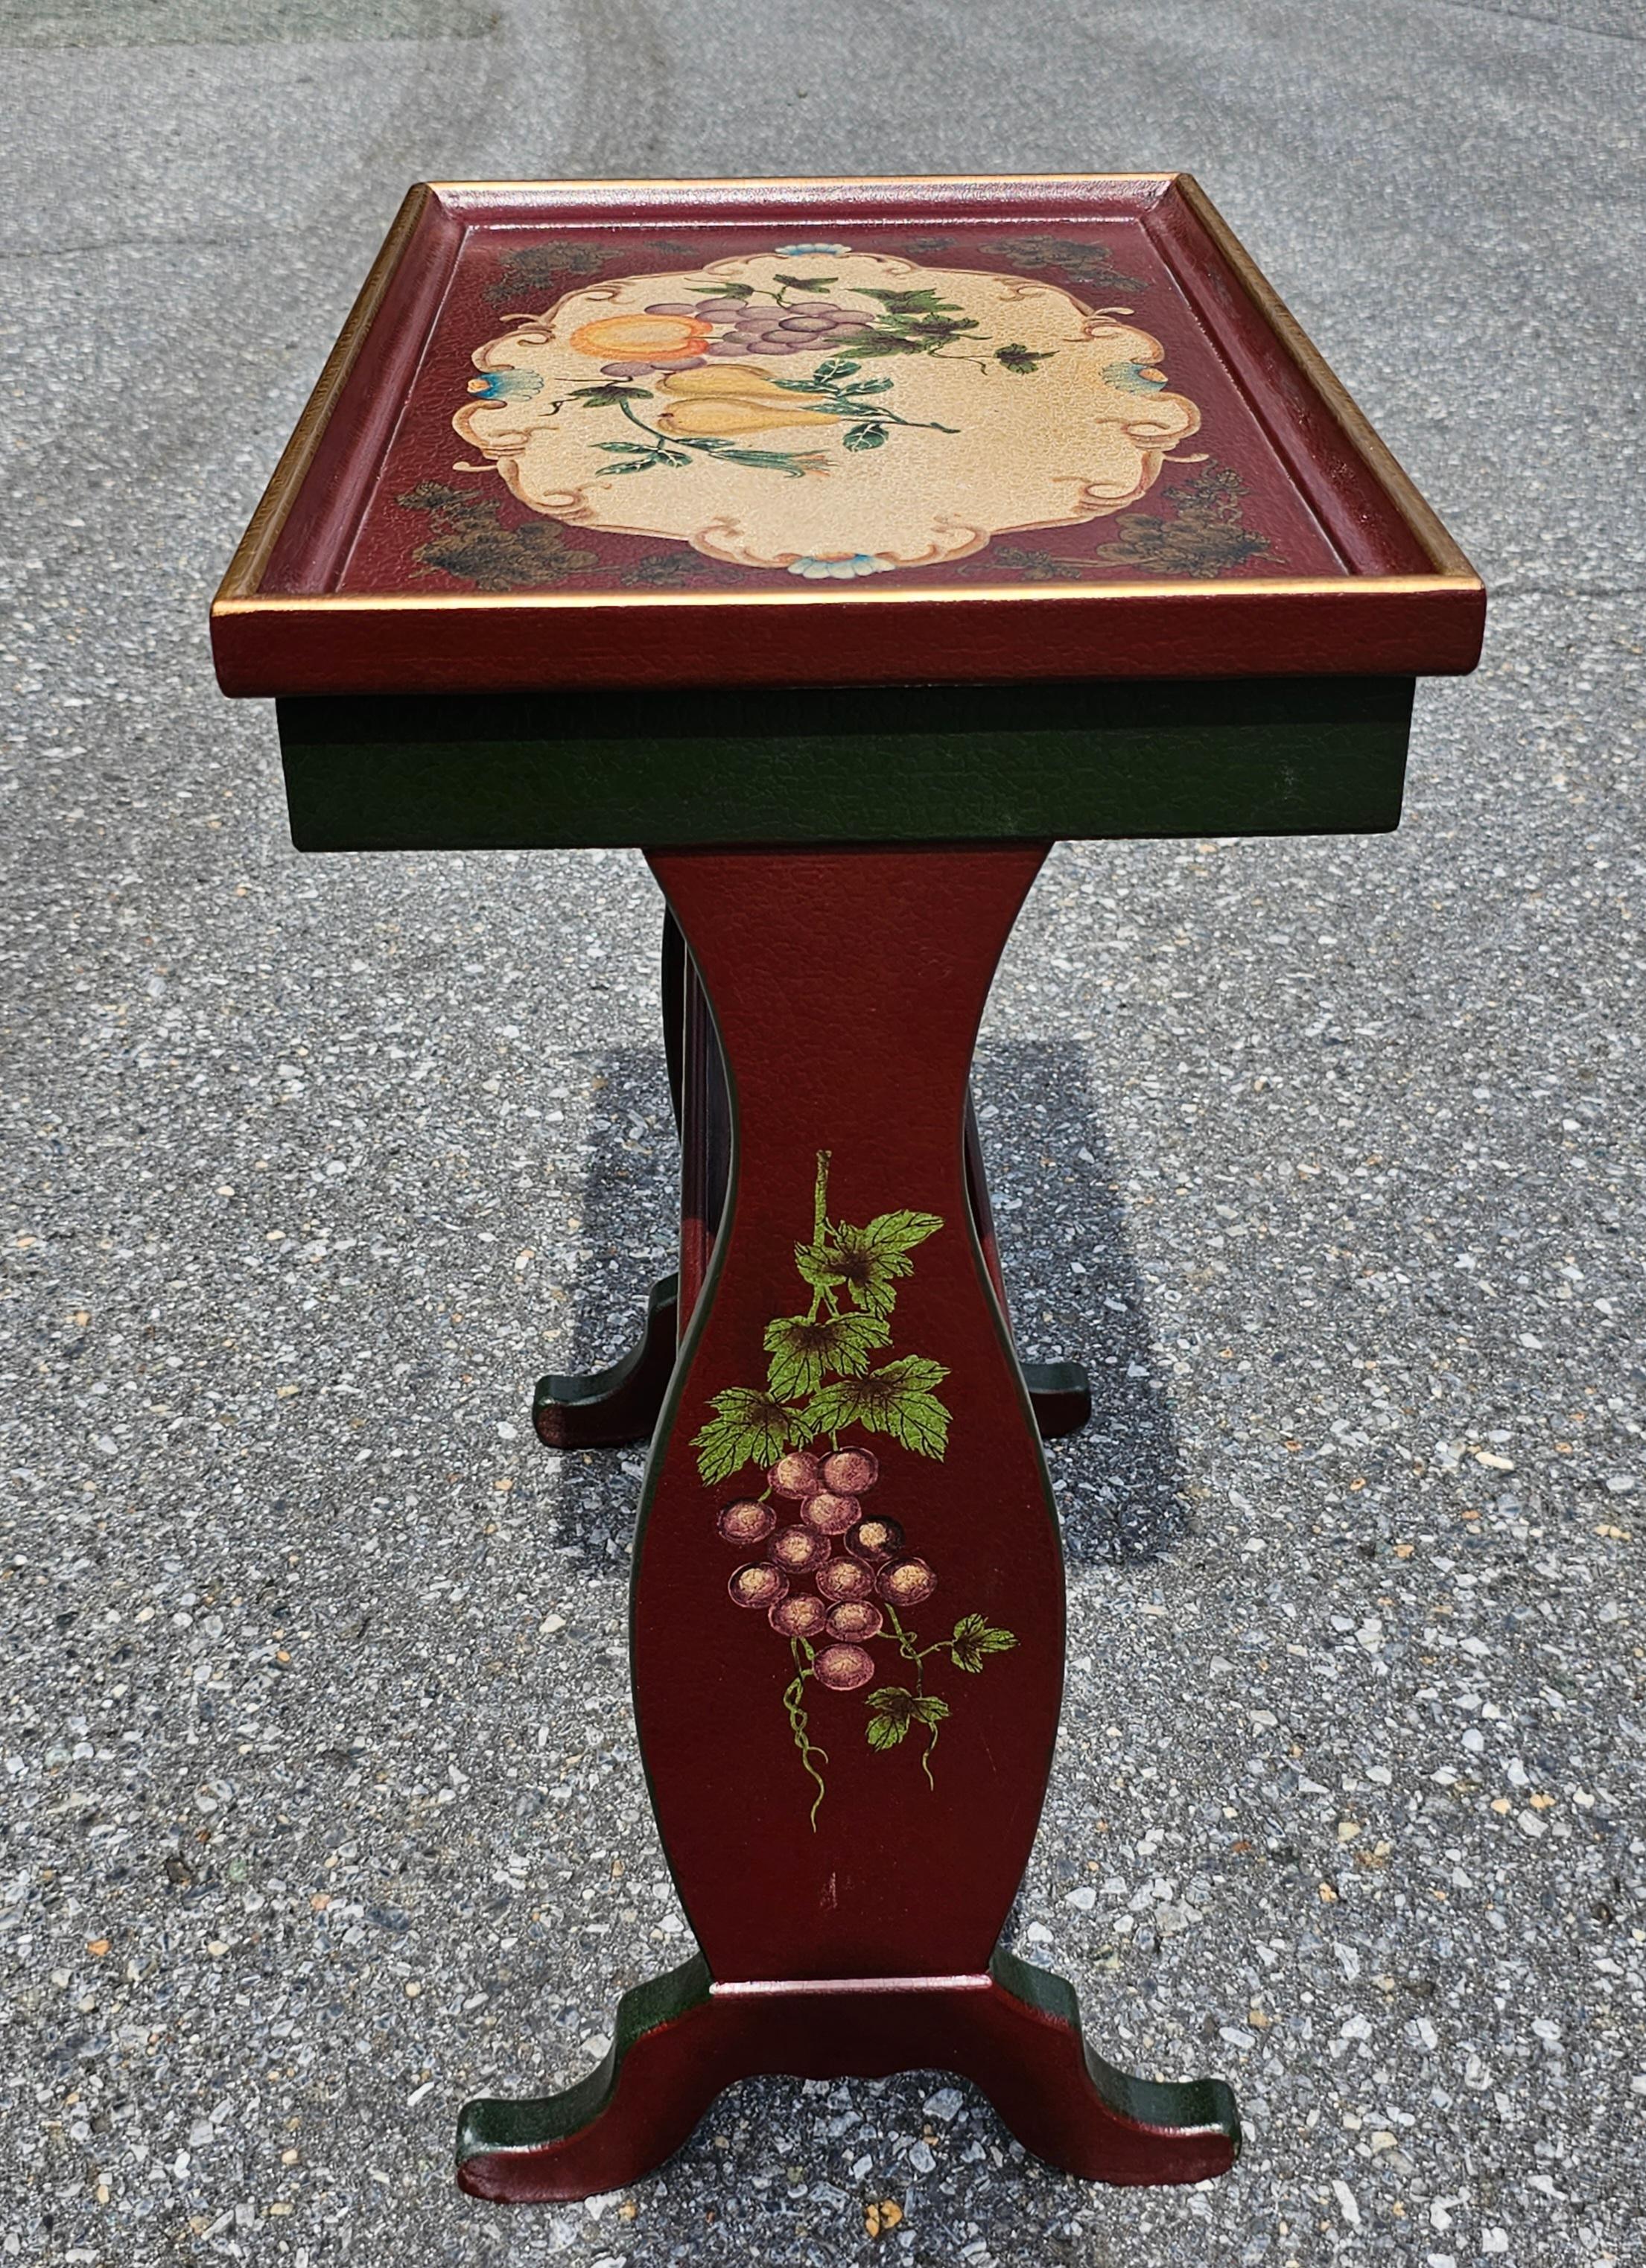 Vintage Crackle Painted Two-Tier Stretcher Side Table In Excellent Condition For Sale In Germantown, MD